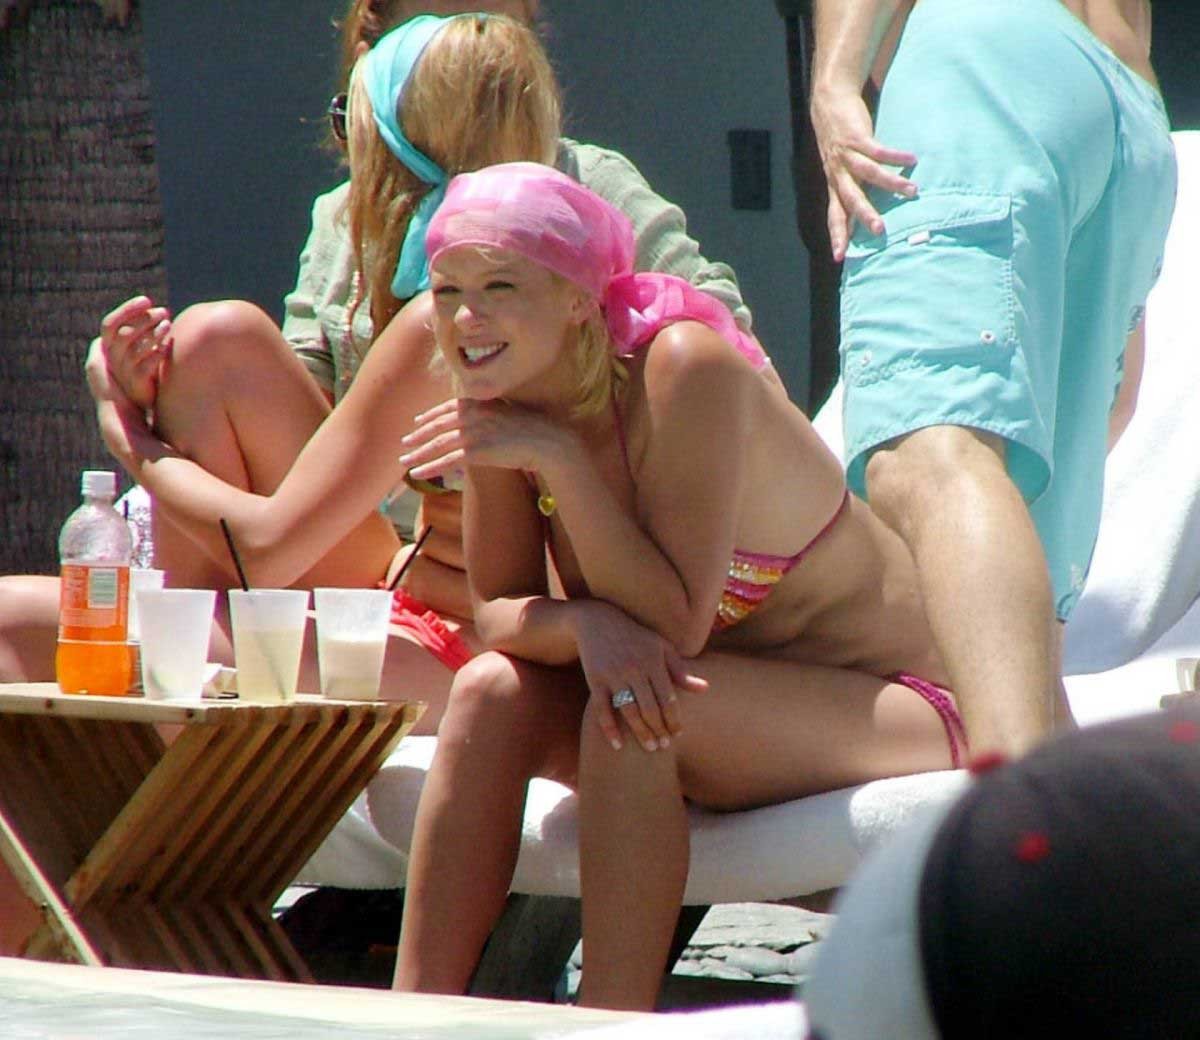 Tara Reid Oops nipple slip pictures and paparazzi pictures #75442824